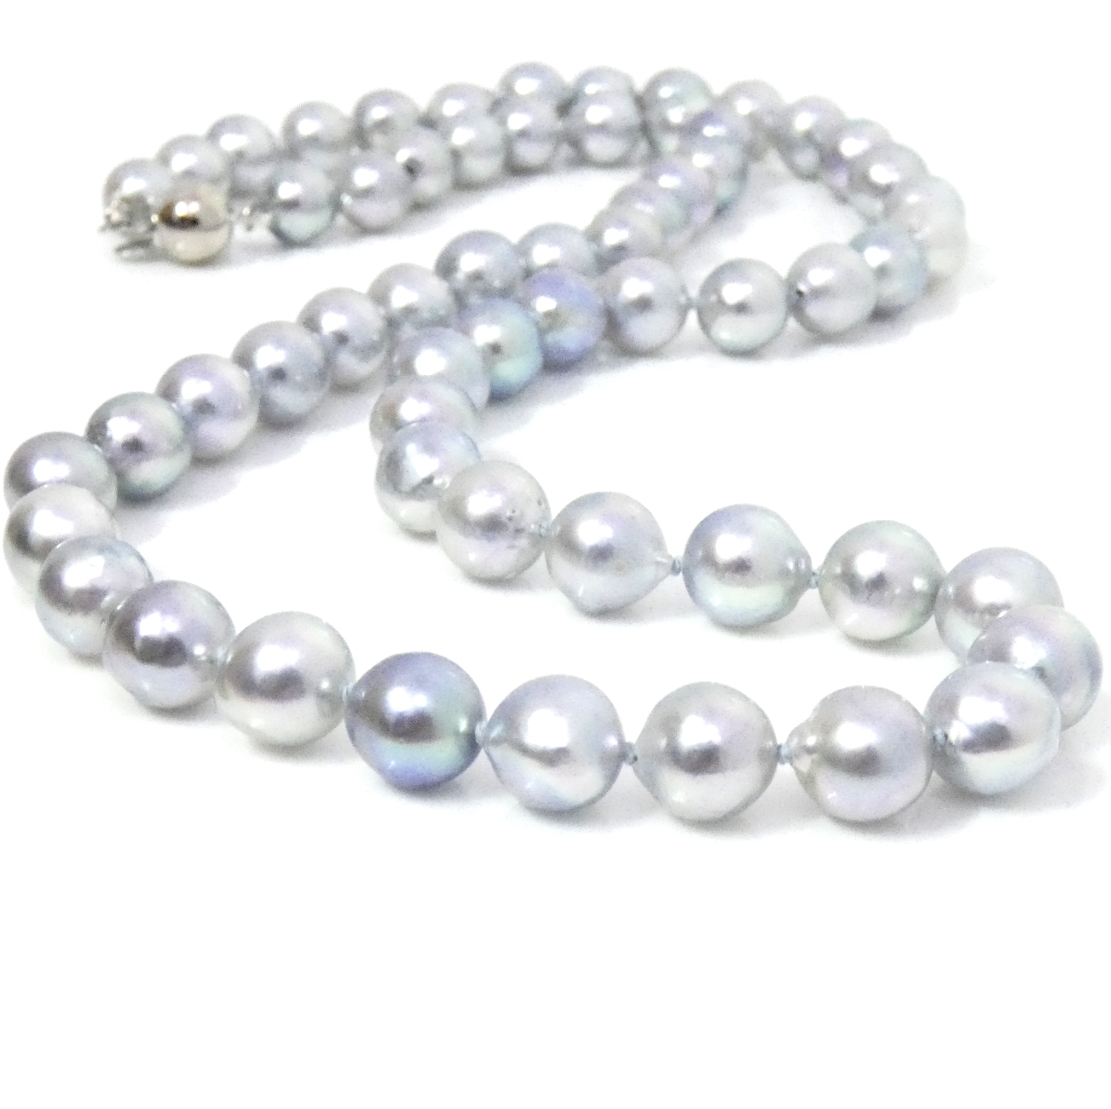 Blue 8-9mm Akoya Pearl Necklace